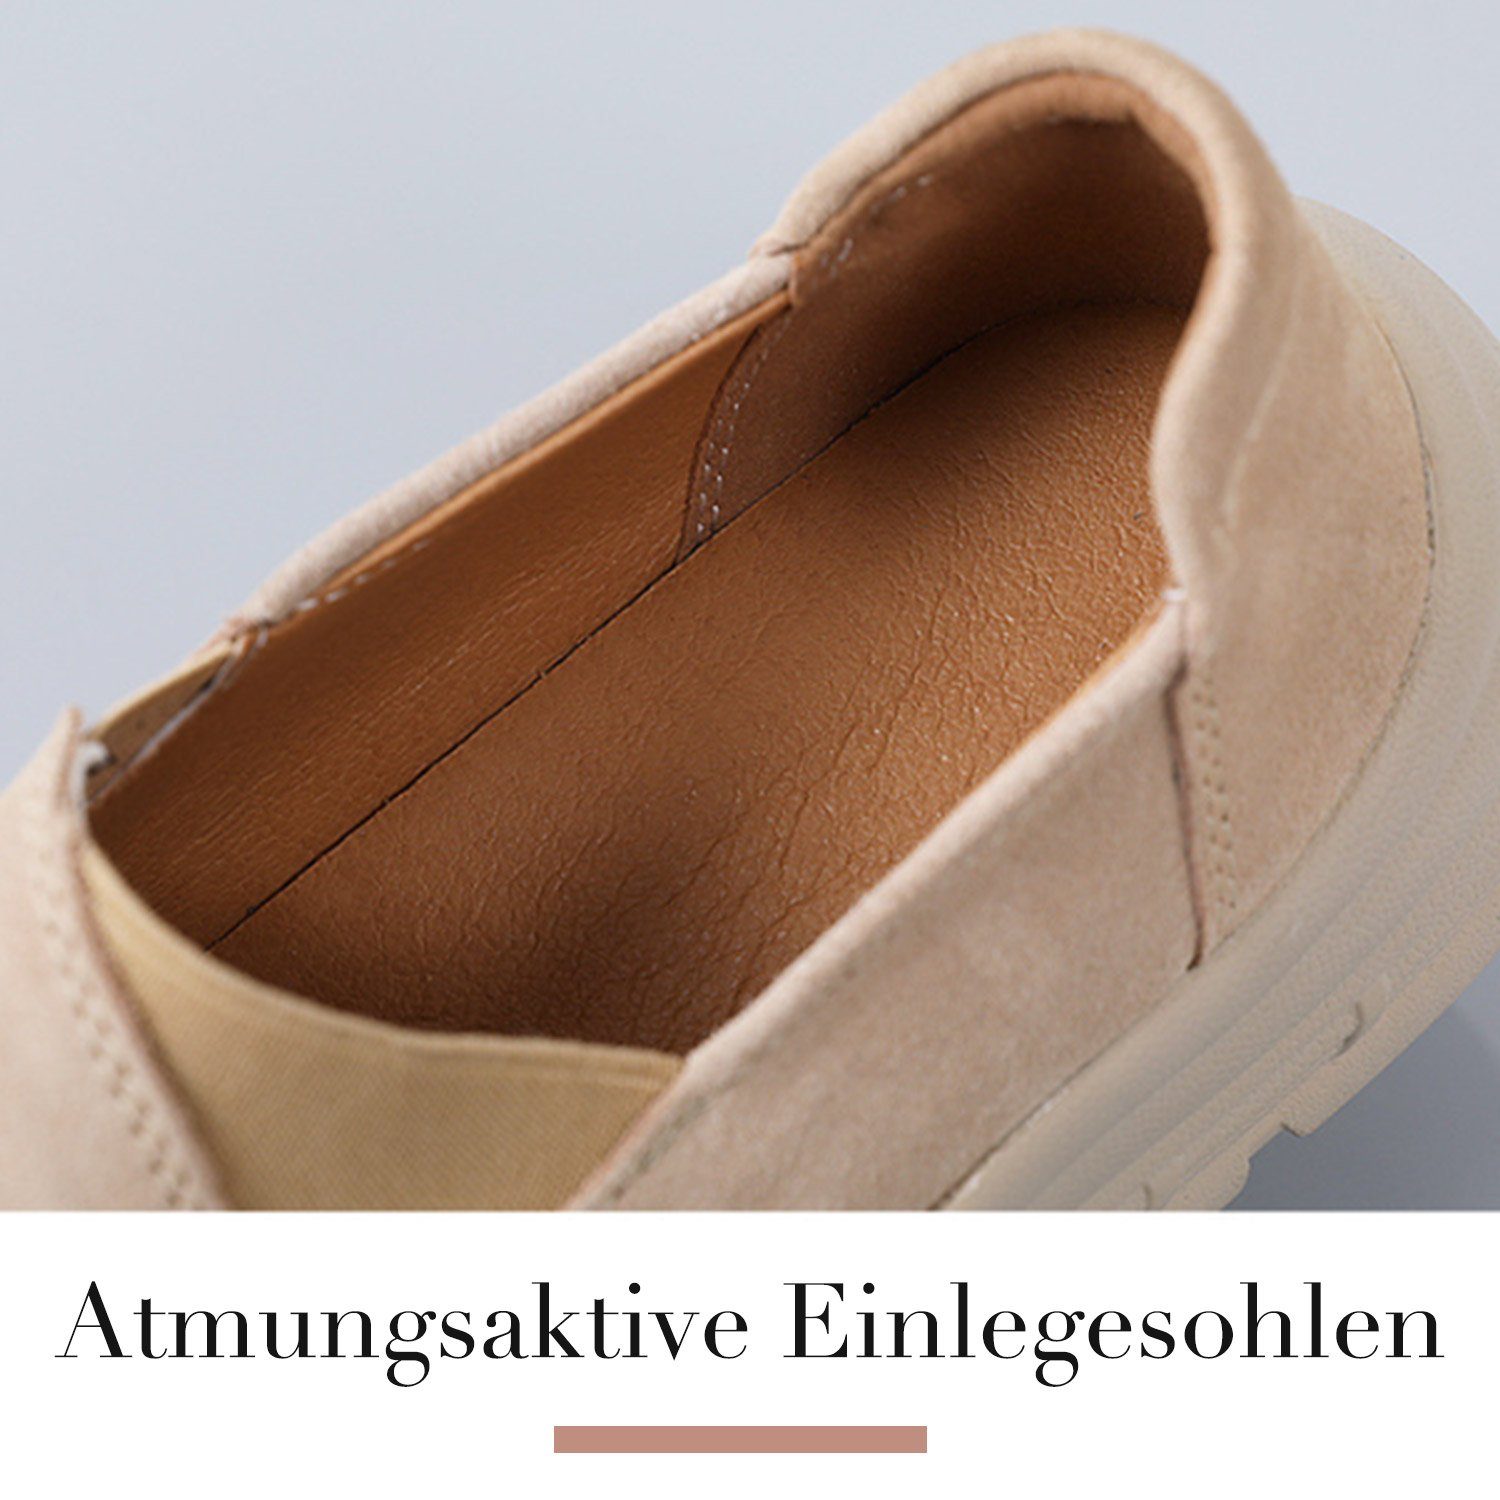 Daisred Turnschuhe mit Plateausohle Loafer Sneakers DunkelGrau Bequeme